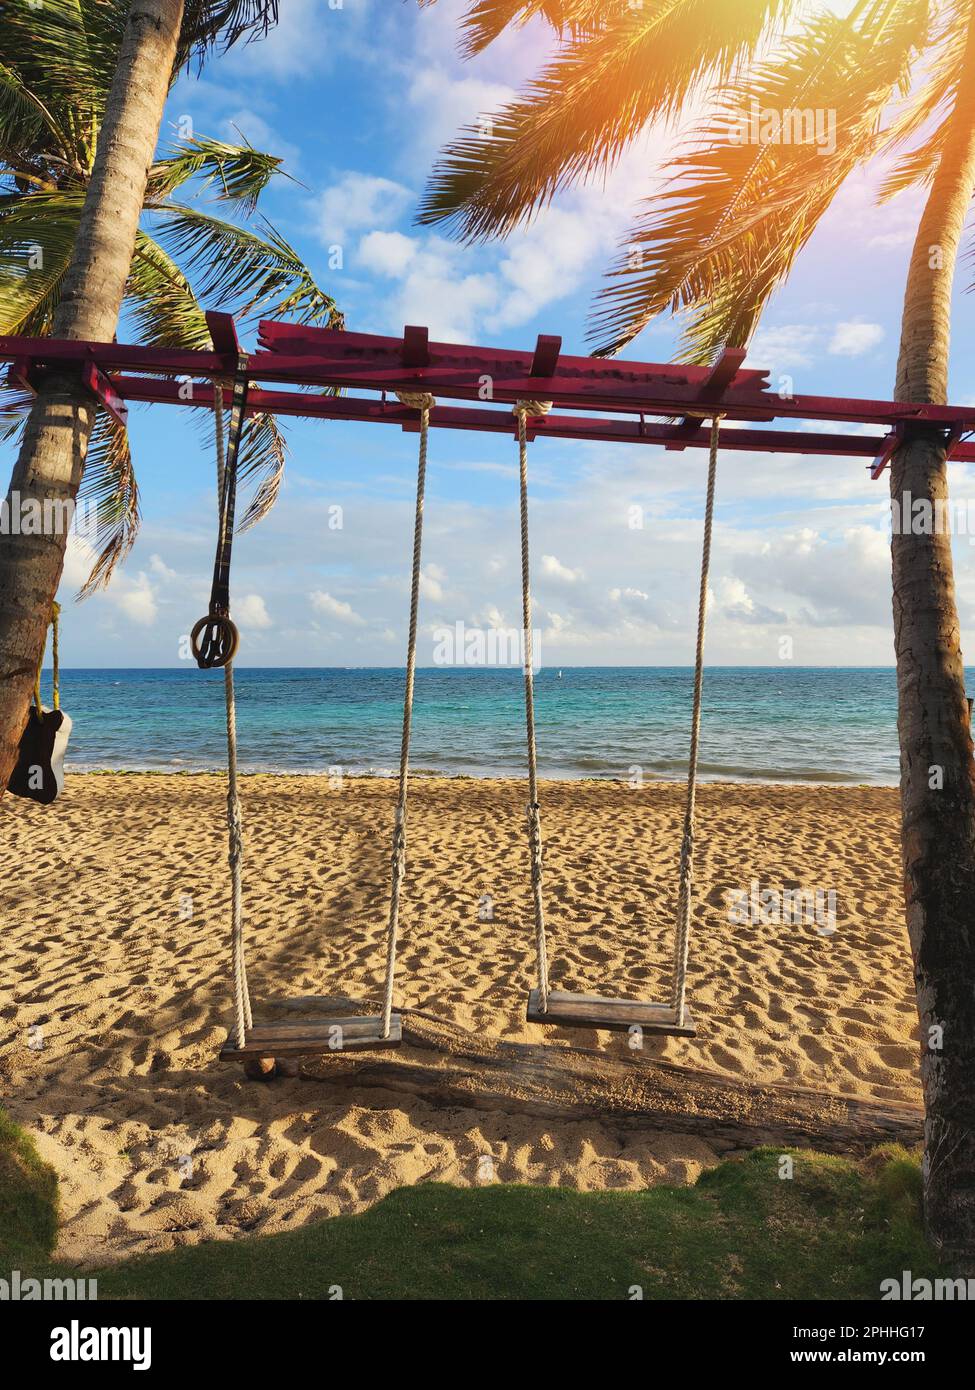 Swings between two palm tree on beach blue sea background Stock Photo